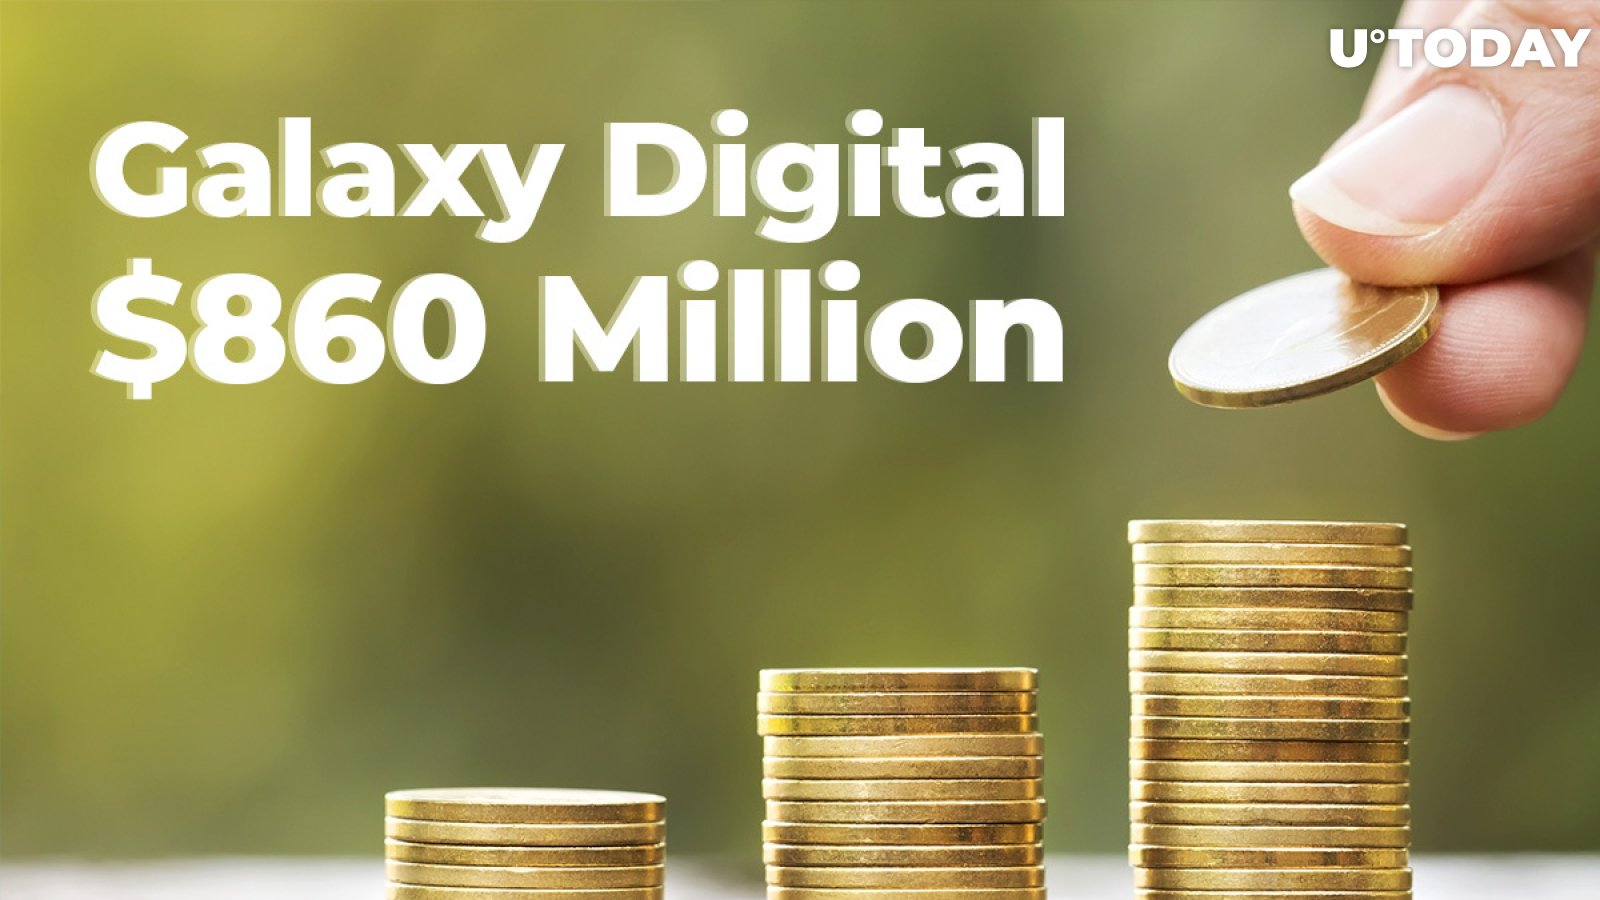 Crypto Bank Galaxy Digital Announces $860 Million in Net Comprehensive Income in Q1, Showing 58% Rise